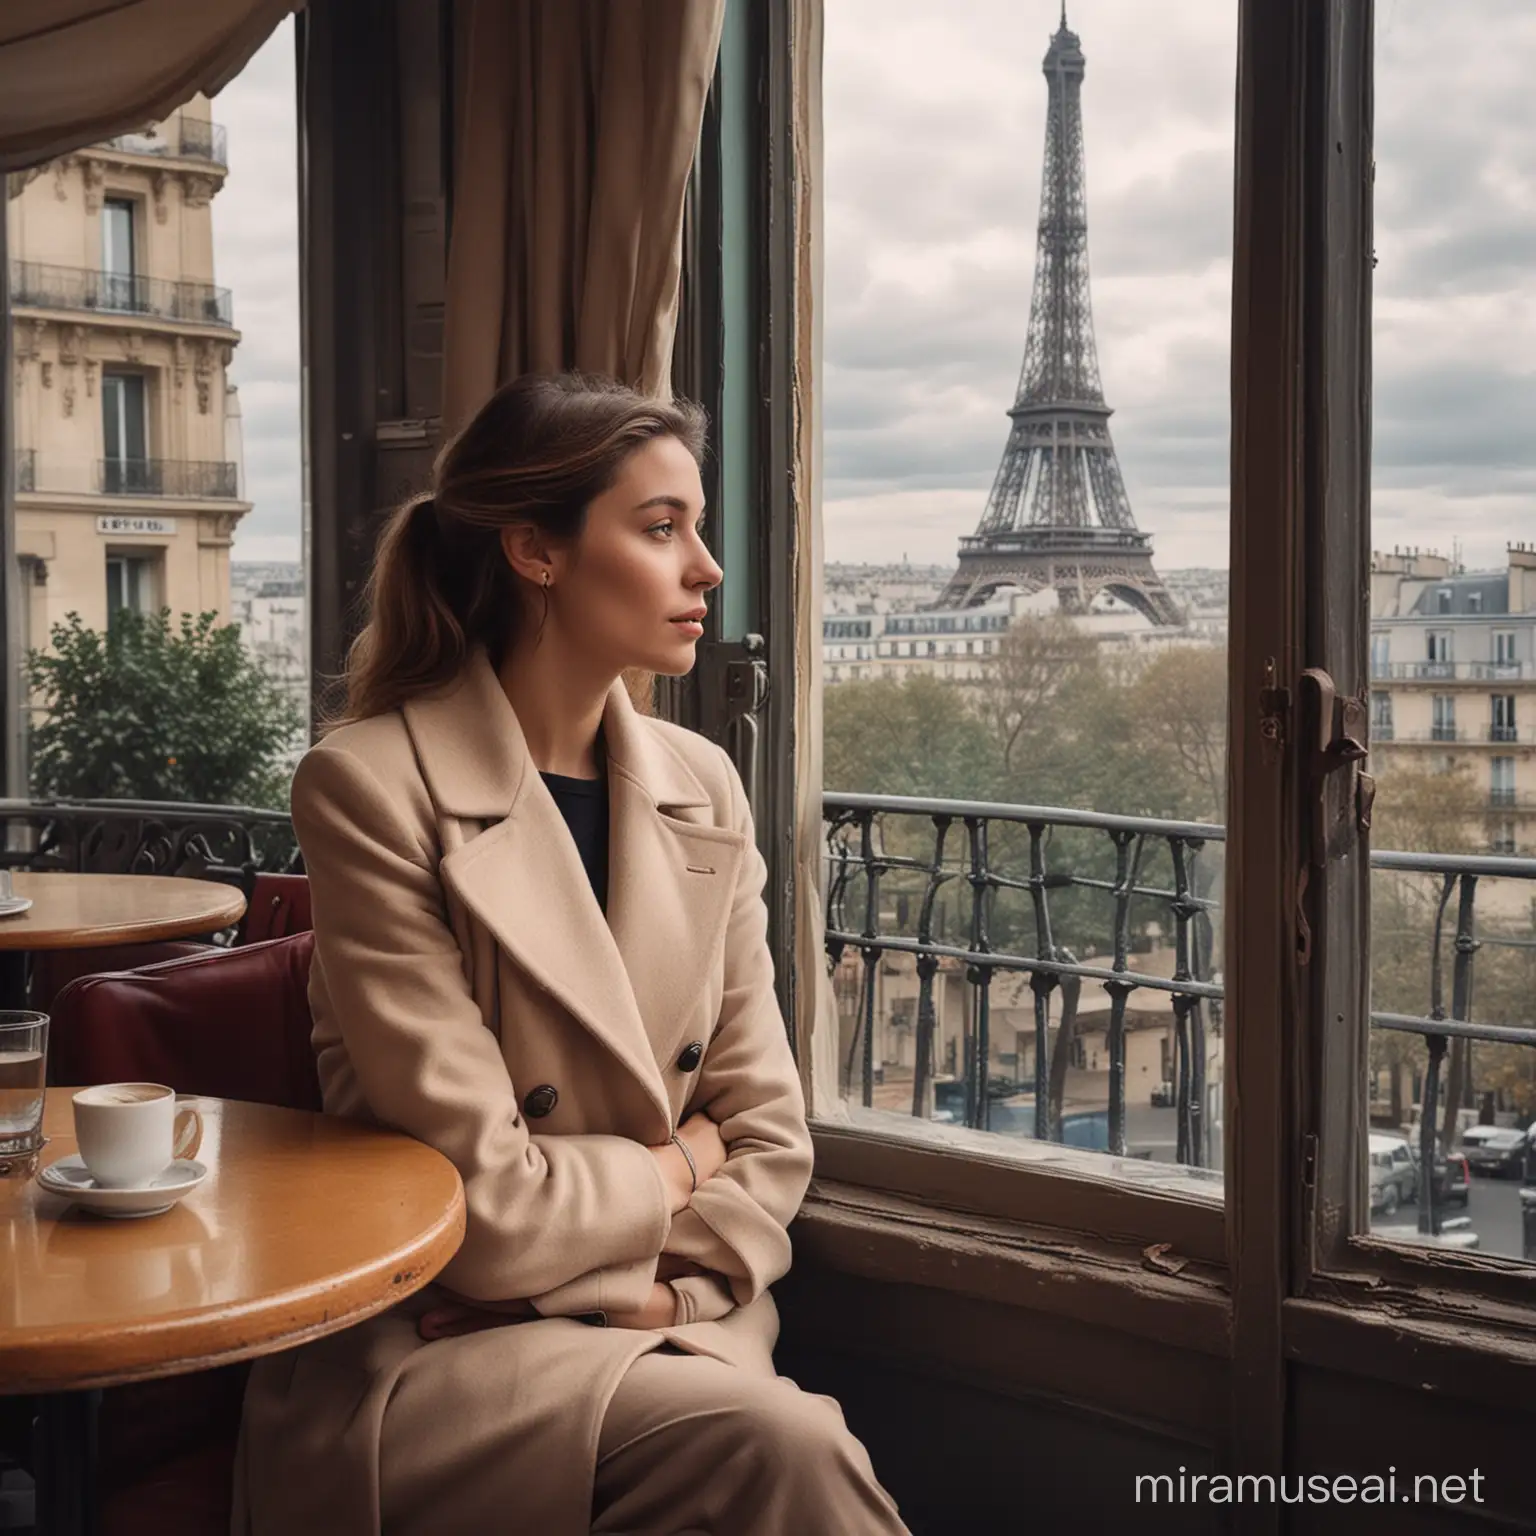 color picture of a mysterious woman sitting inside a French café in Paris, wearing a coat. She must have  her hands in her pockets, and be looking out of a large window overlooking the Eiffel tower